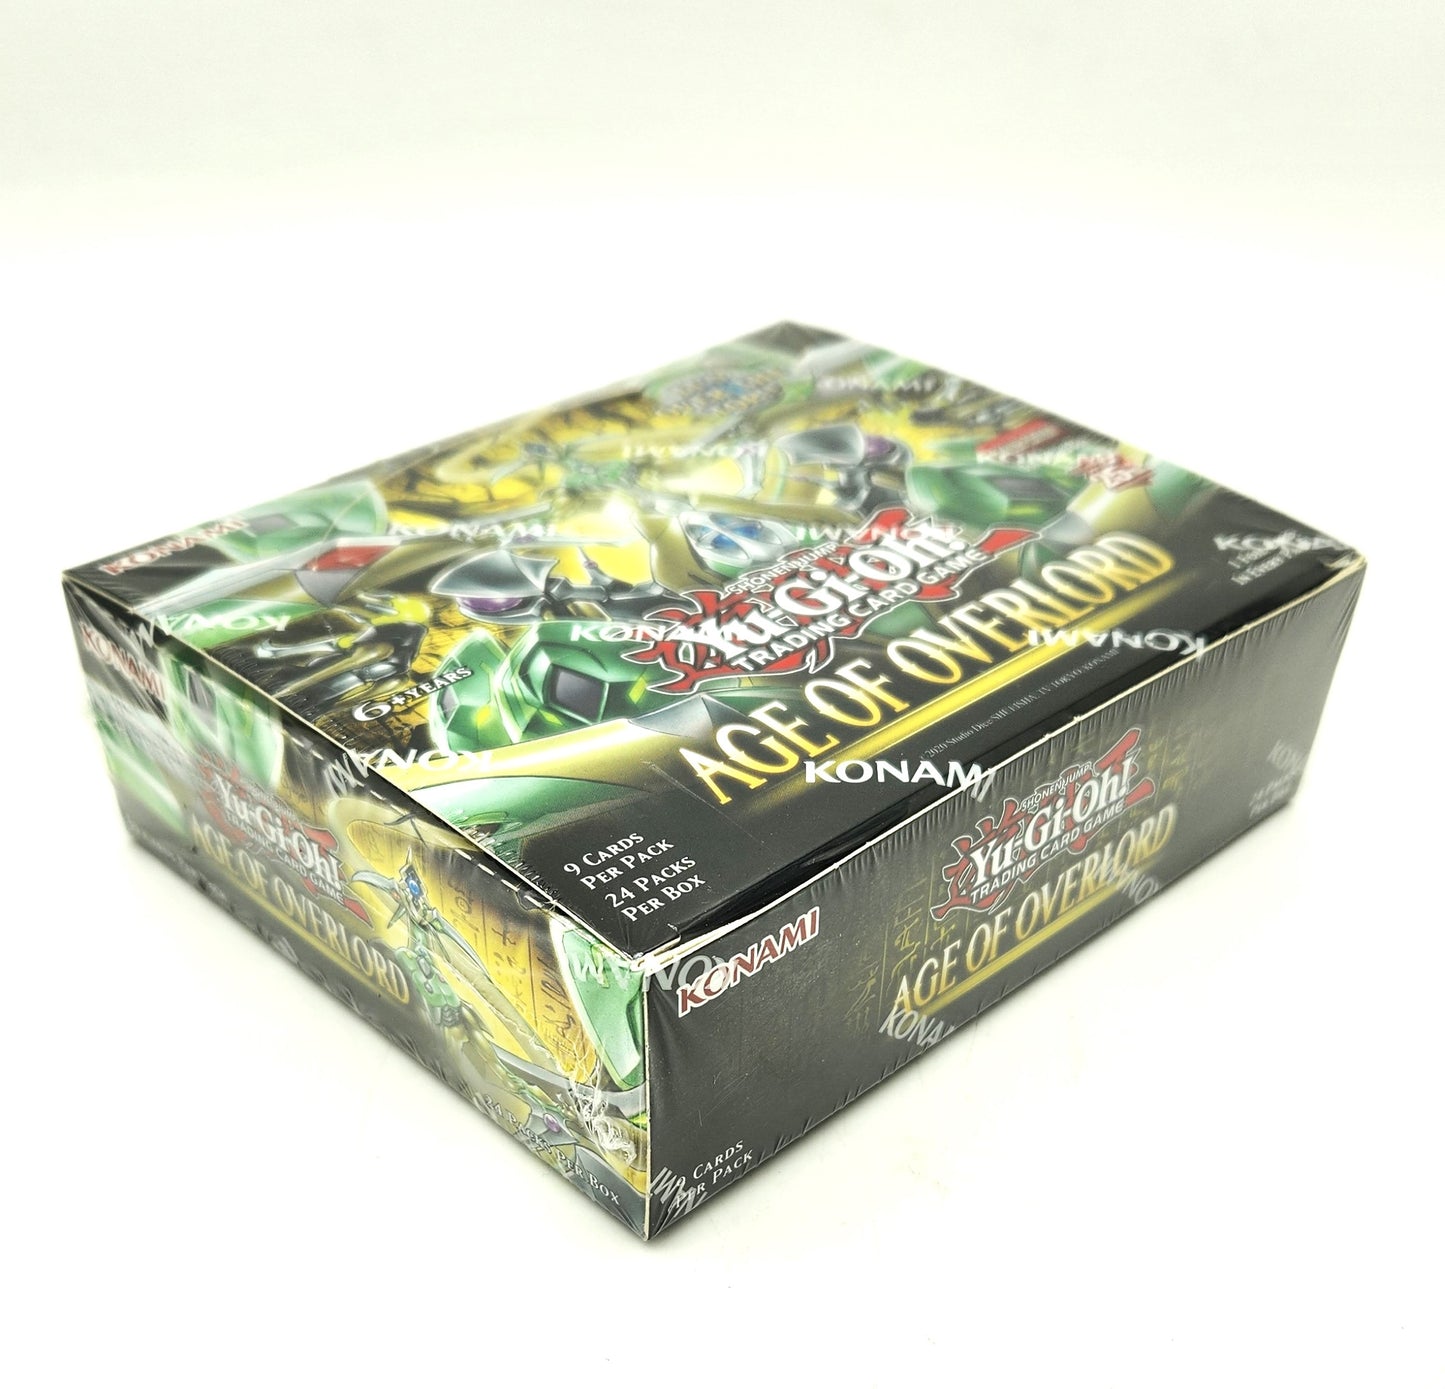 Yu-Gi-Oh! - Age of Overlord Booster (Sealed Box)